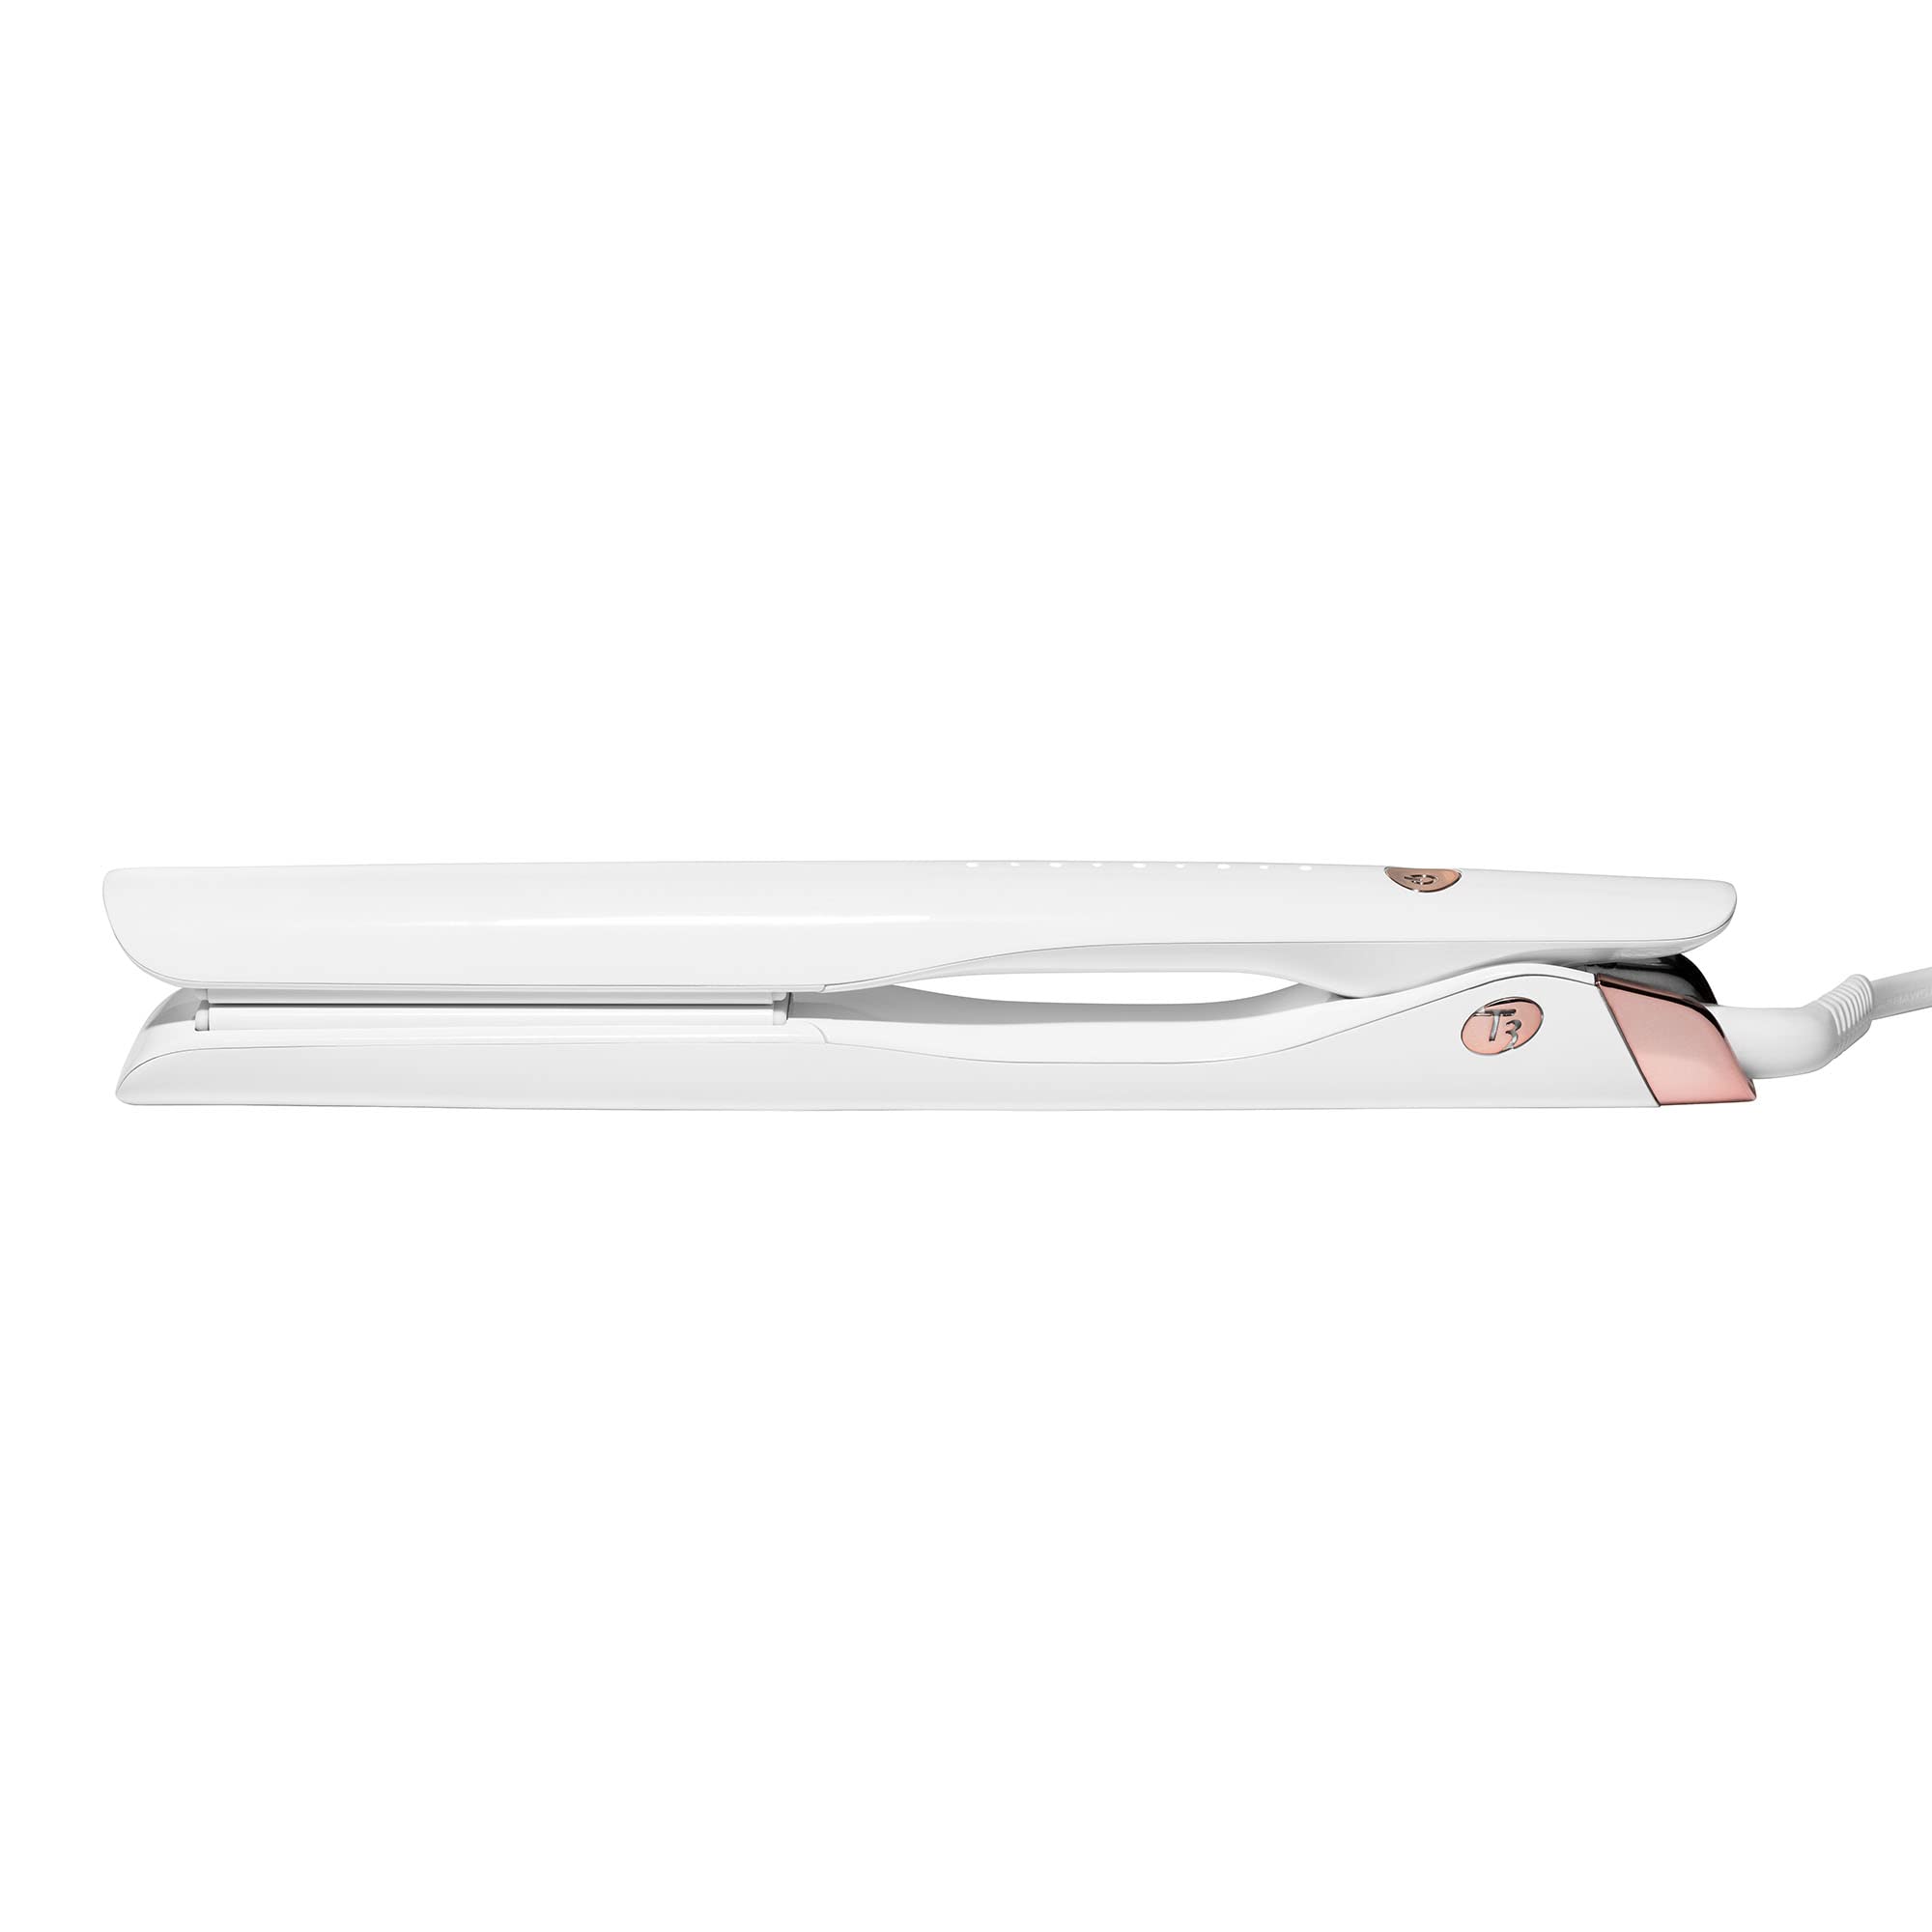 T3 Lucea Professional Straightening & Styling Iron, 1” or 1.5” Digital Ceramic Flat Iron with 9 Adjustable Heat Settings for Straight, Smooth Styles or Waves and Curls on All Hair Types